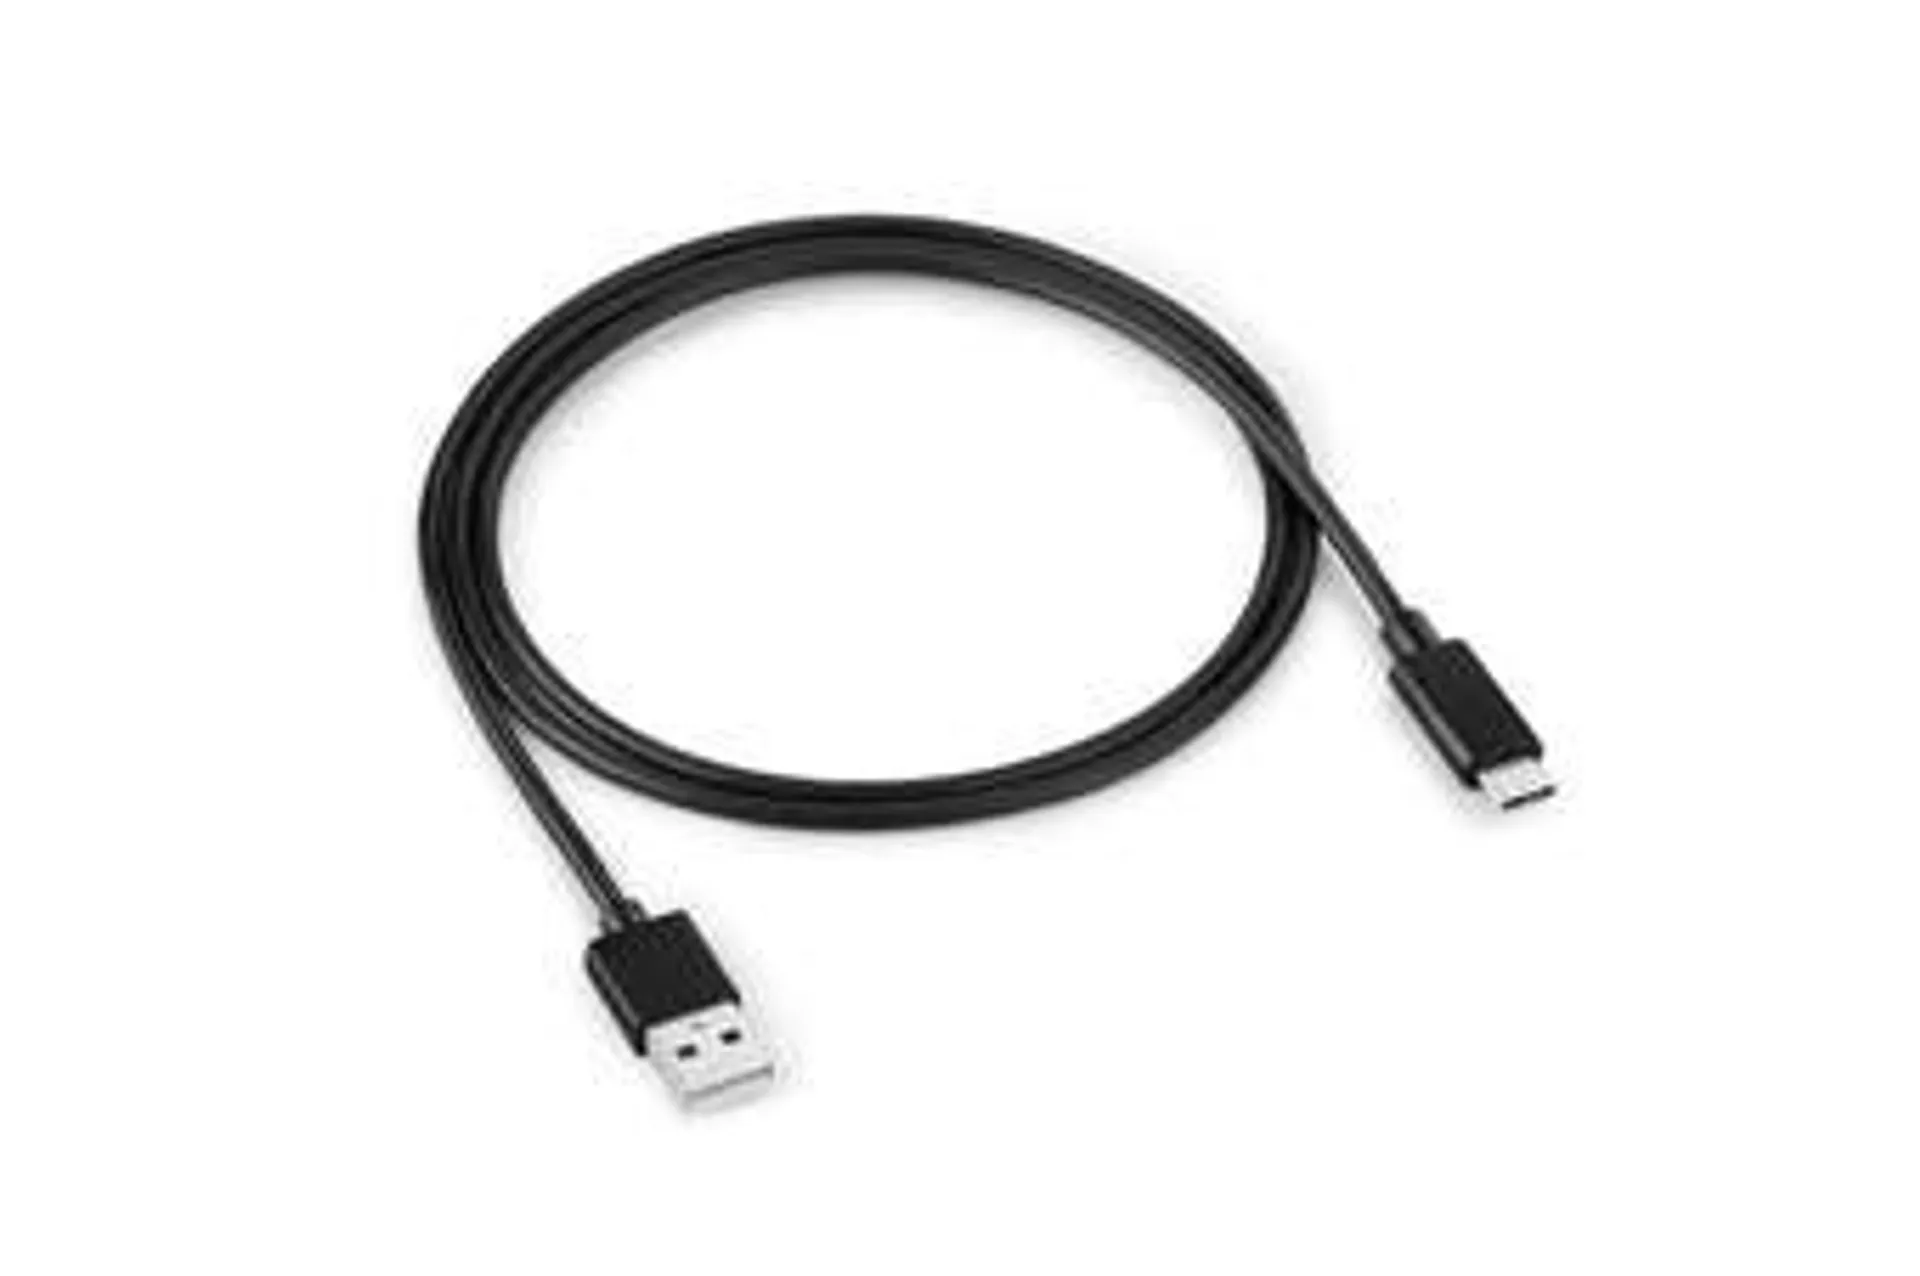 1m USB-A to USB-C Cable